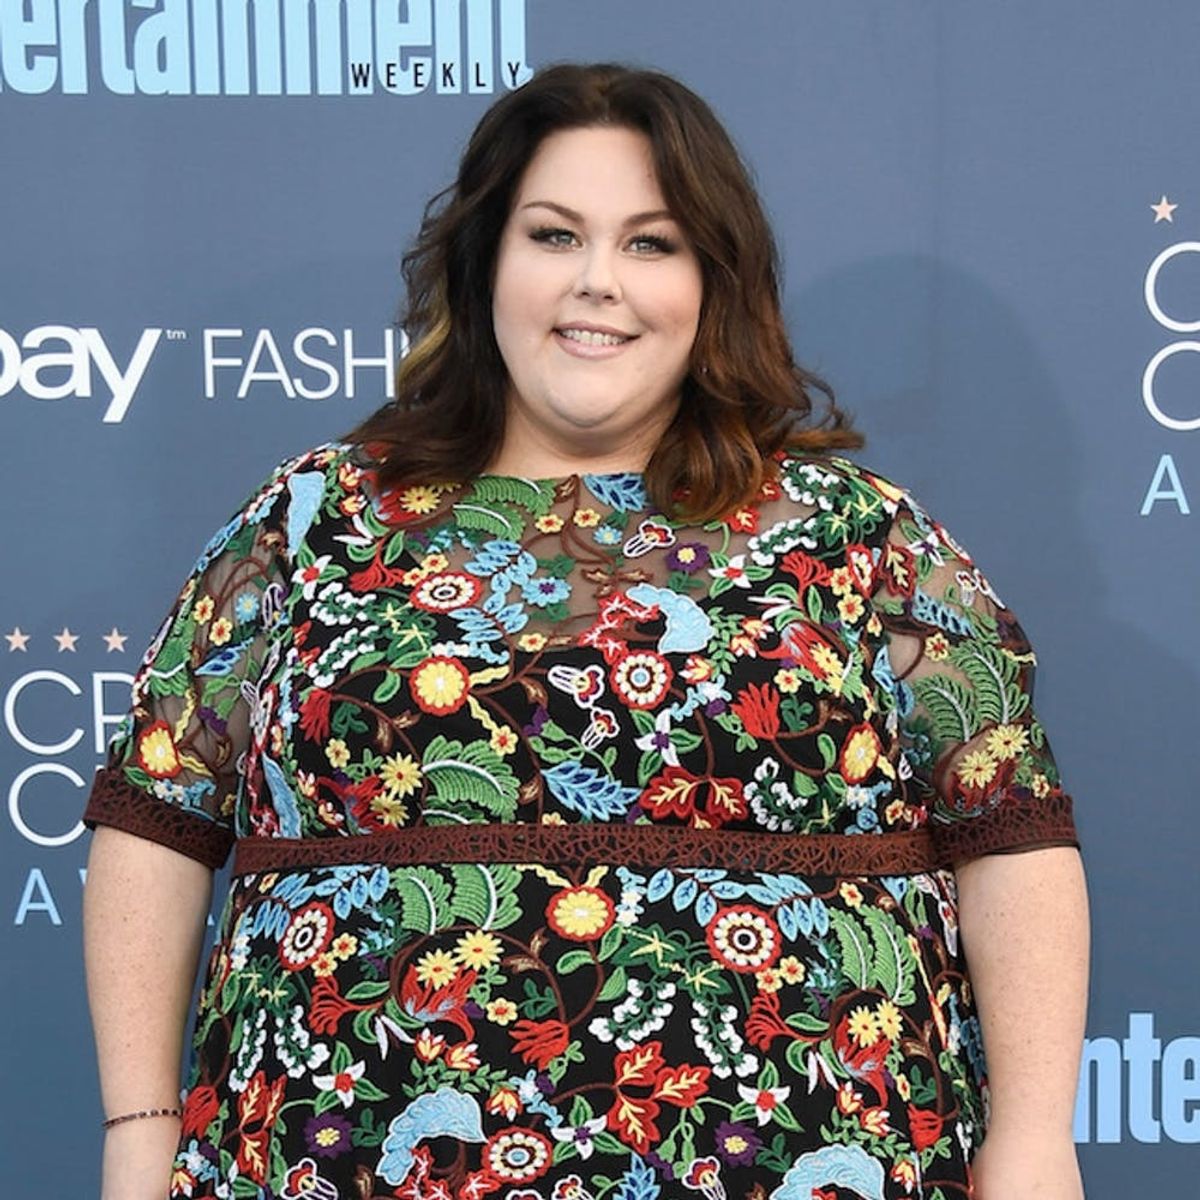 7 Things You Need to Know About This Is Us Breakout Star Chrissy Metz